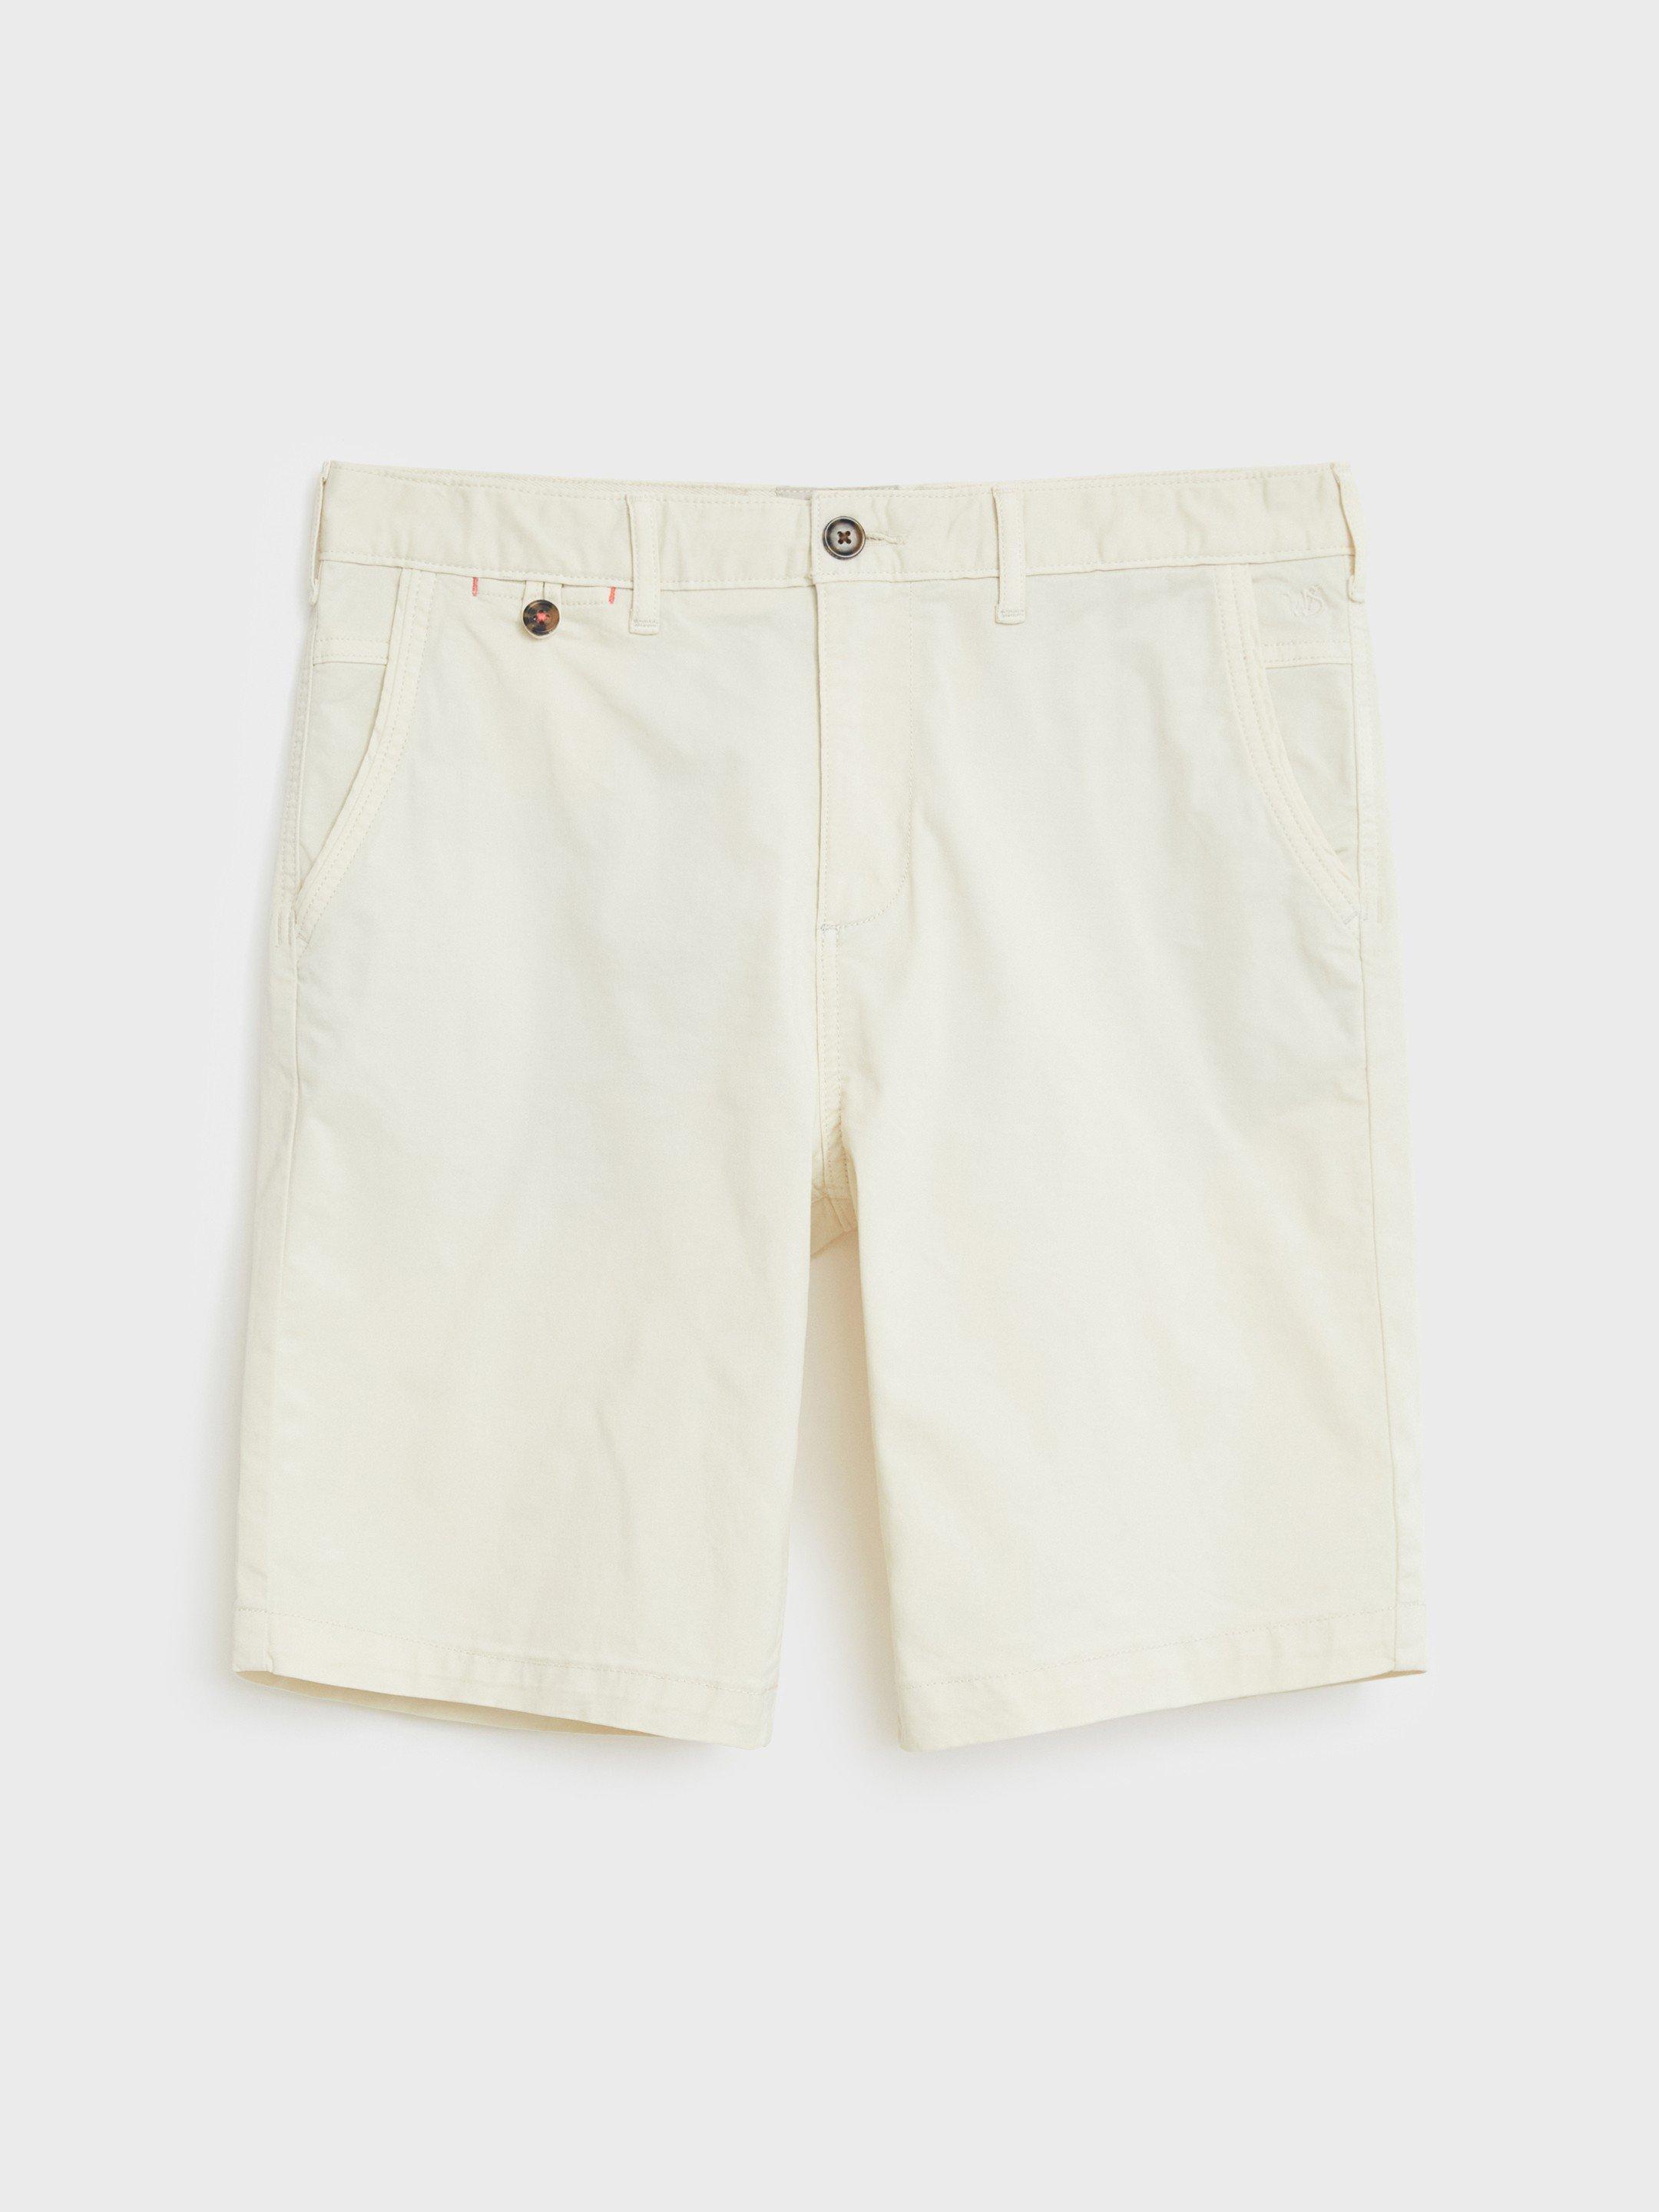 Sutton Organic Chino Shorts in NAT WHITE - FLAT FRONT